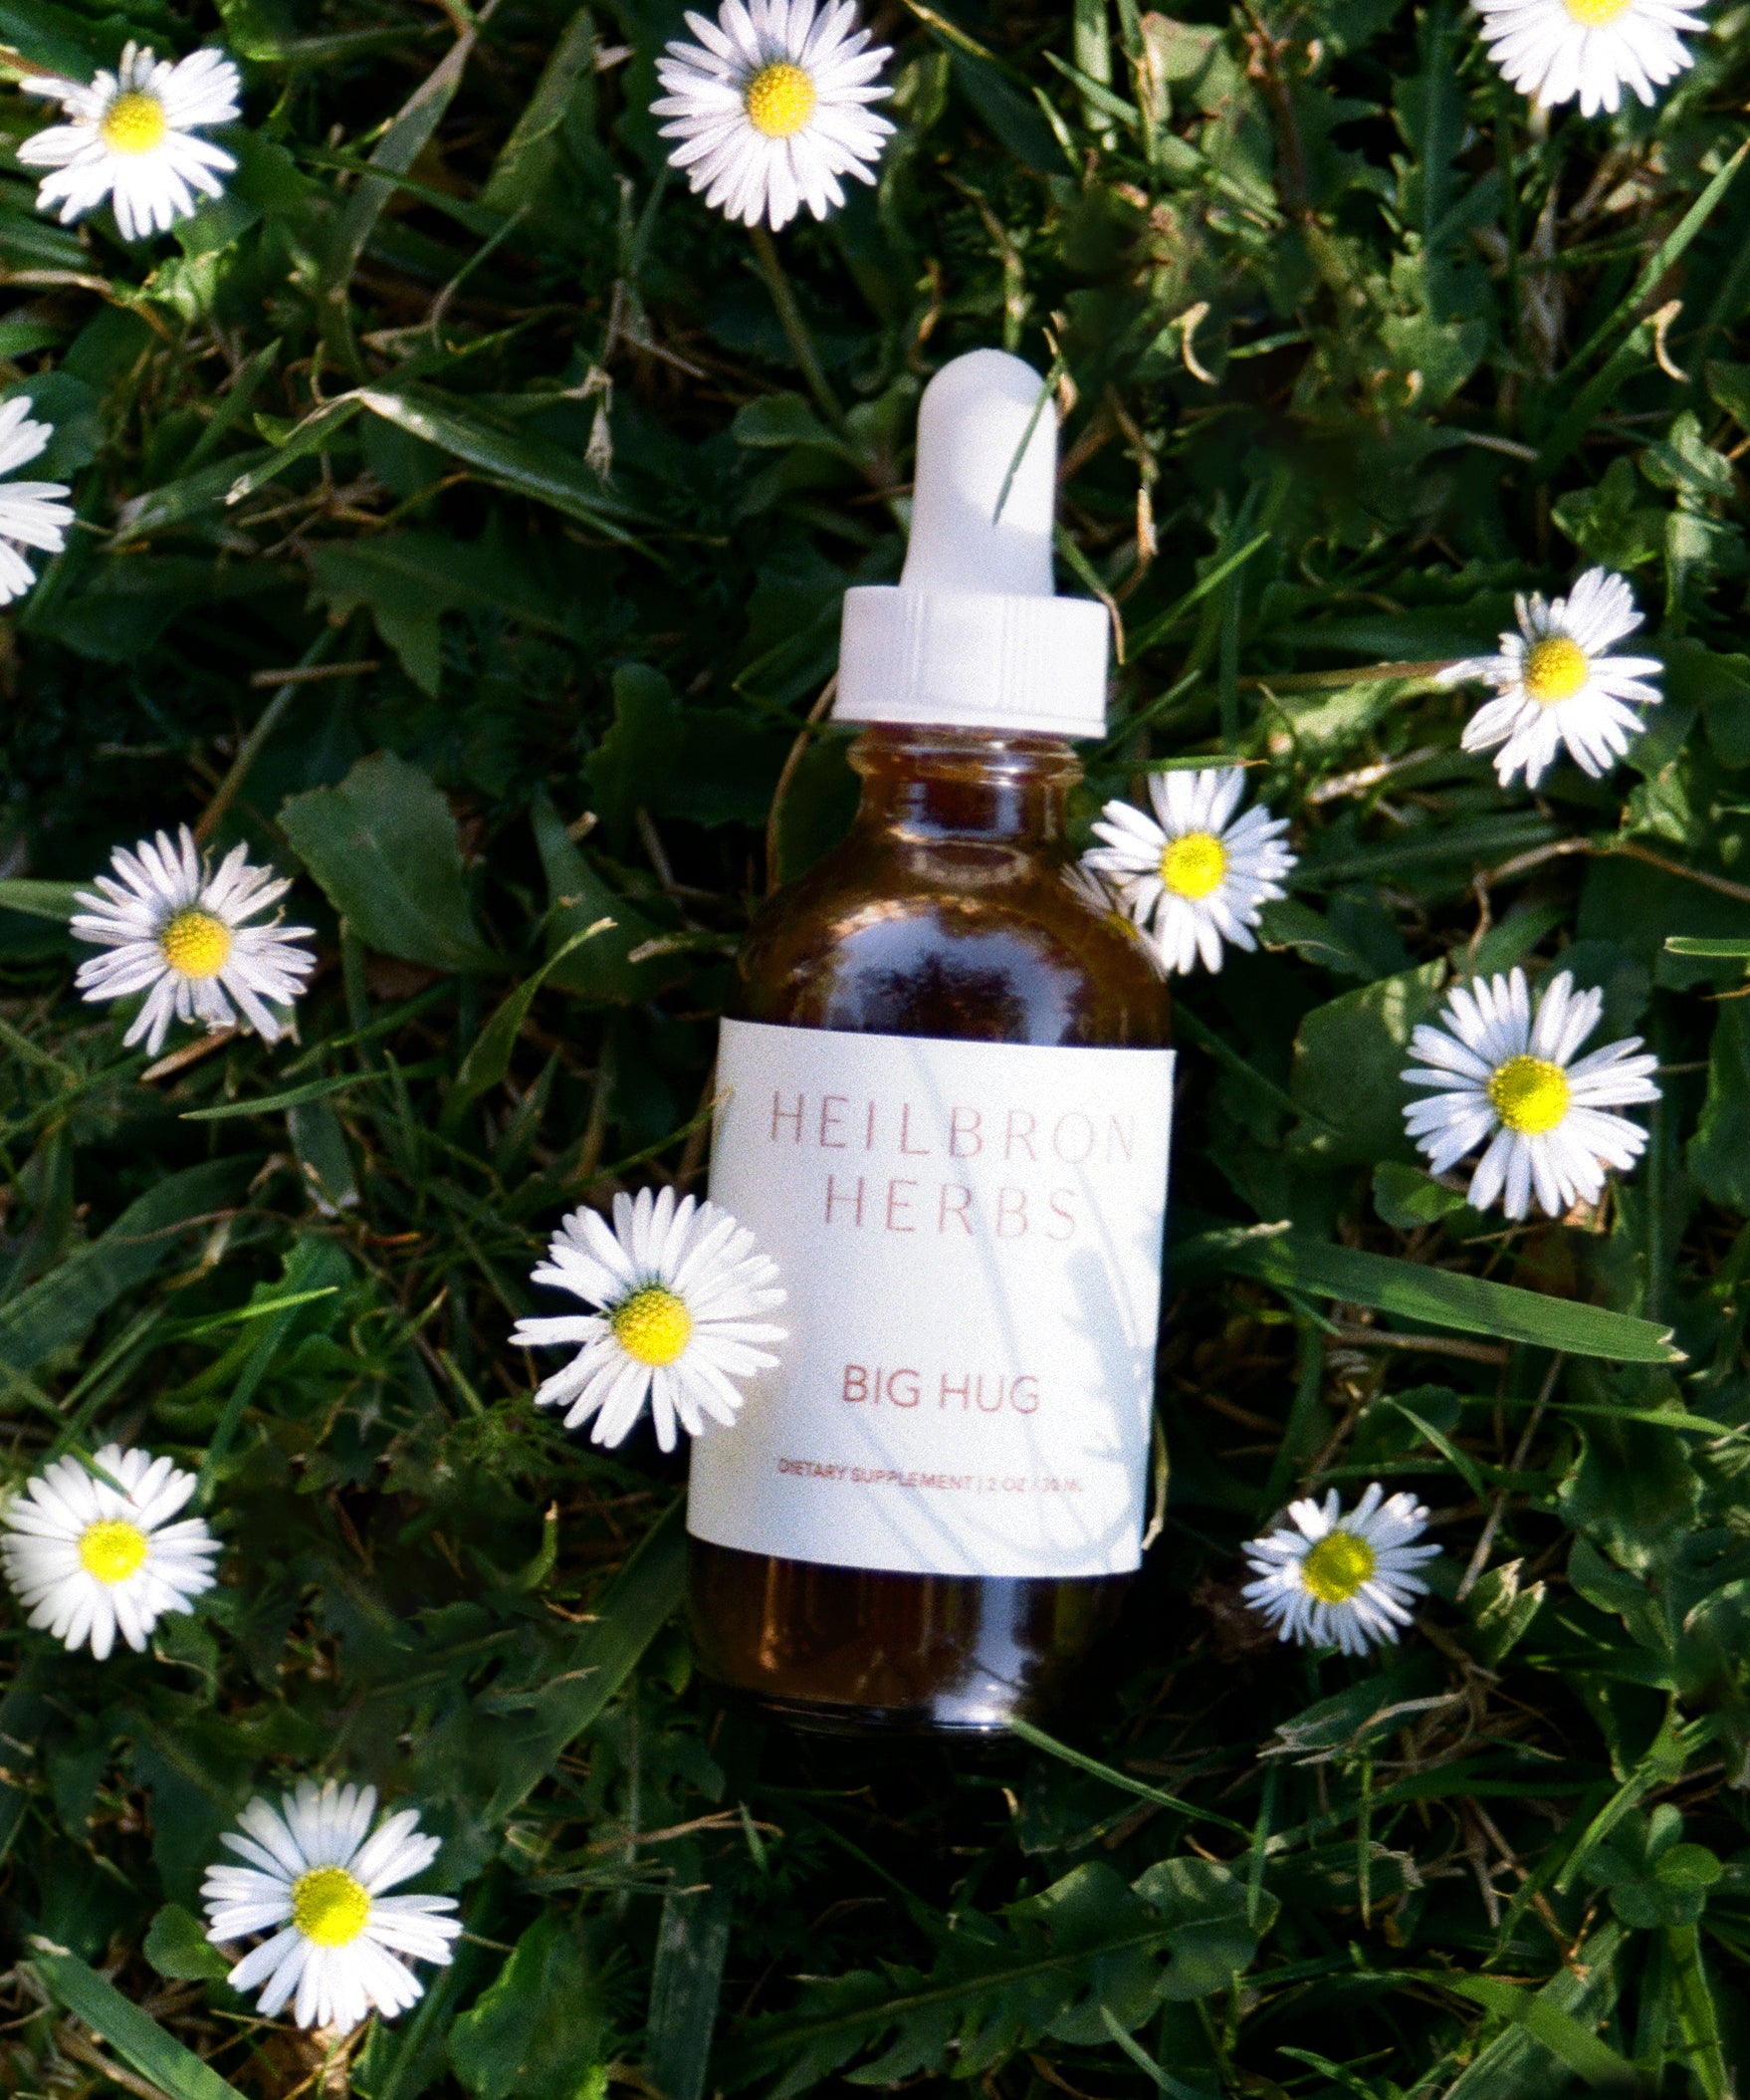 Big Hug tincture on a bed of daisies